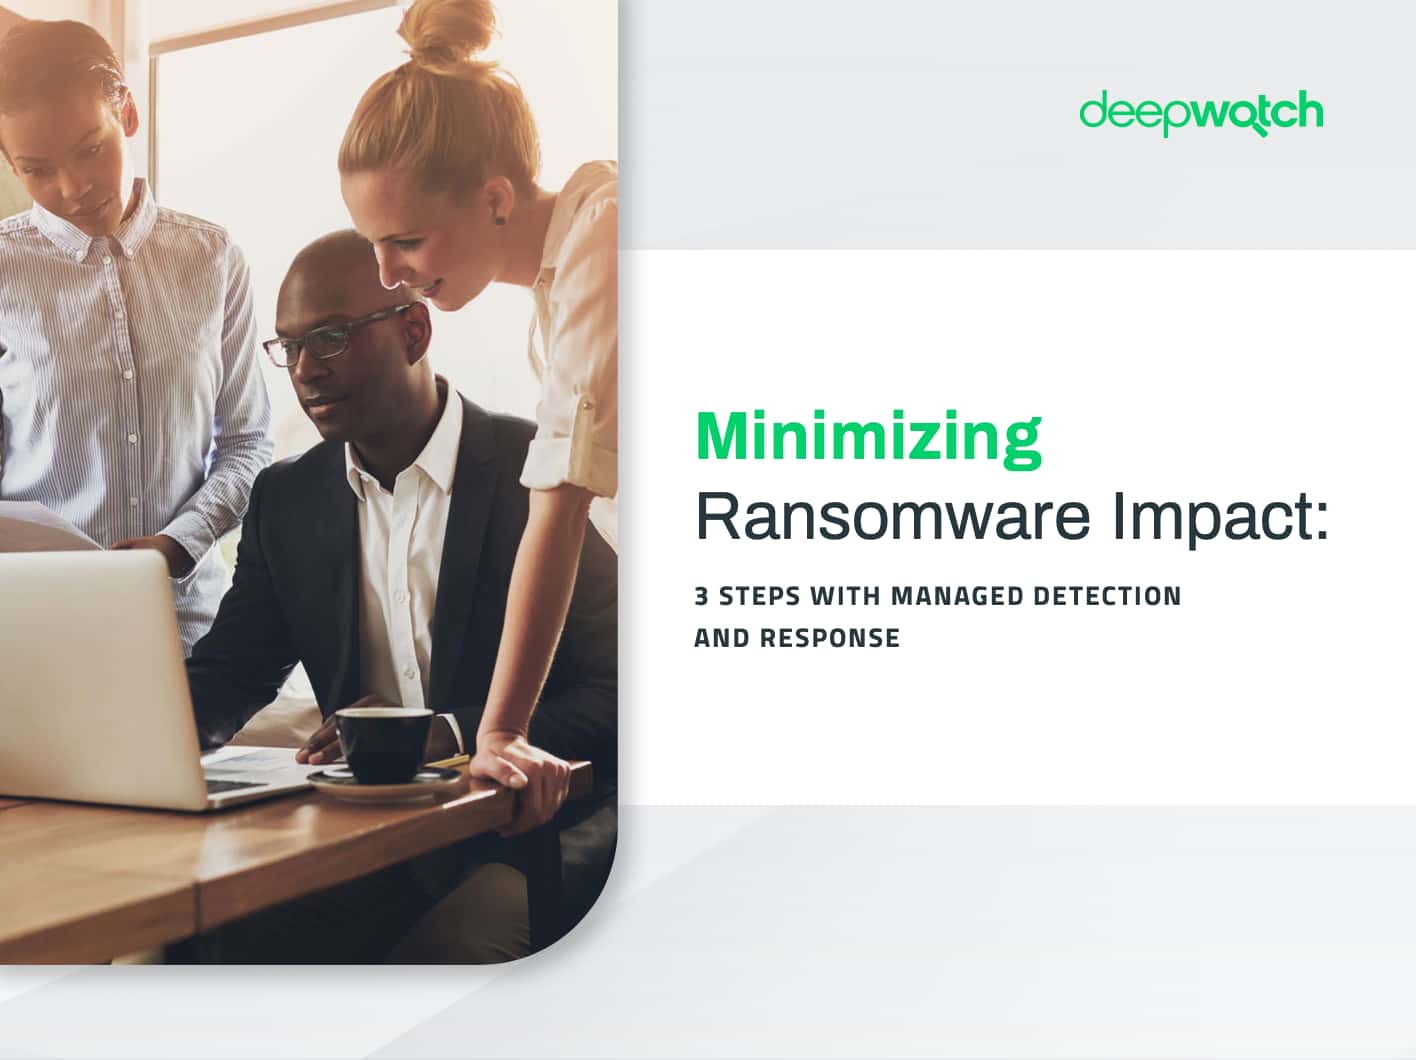 Minimizing Ransomware Impact: 3 steps with managed detection and response